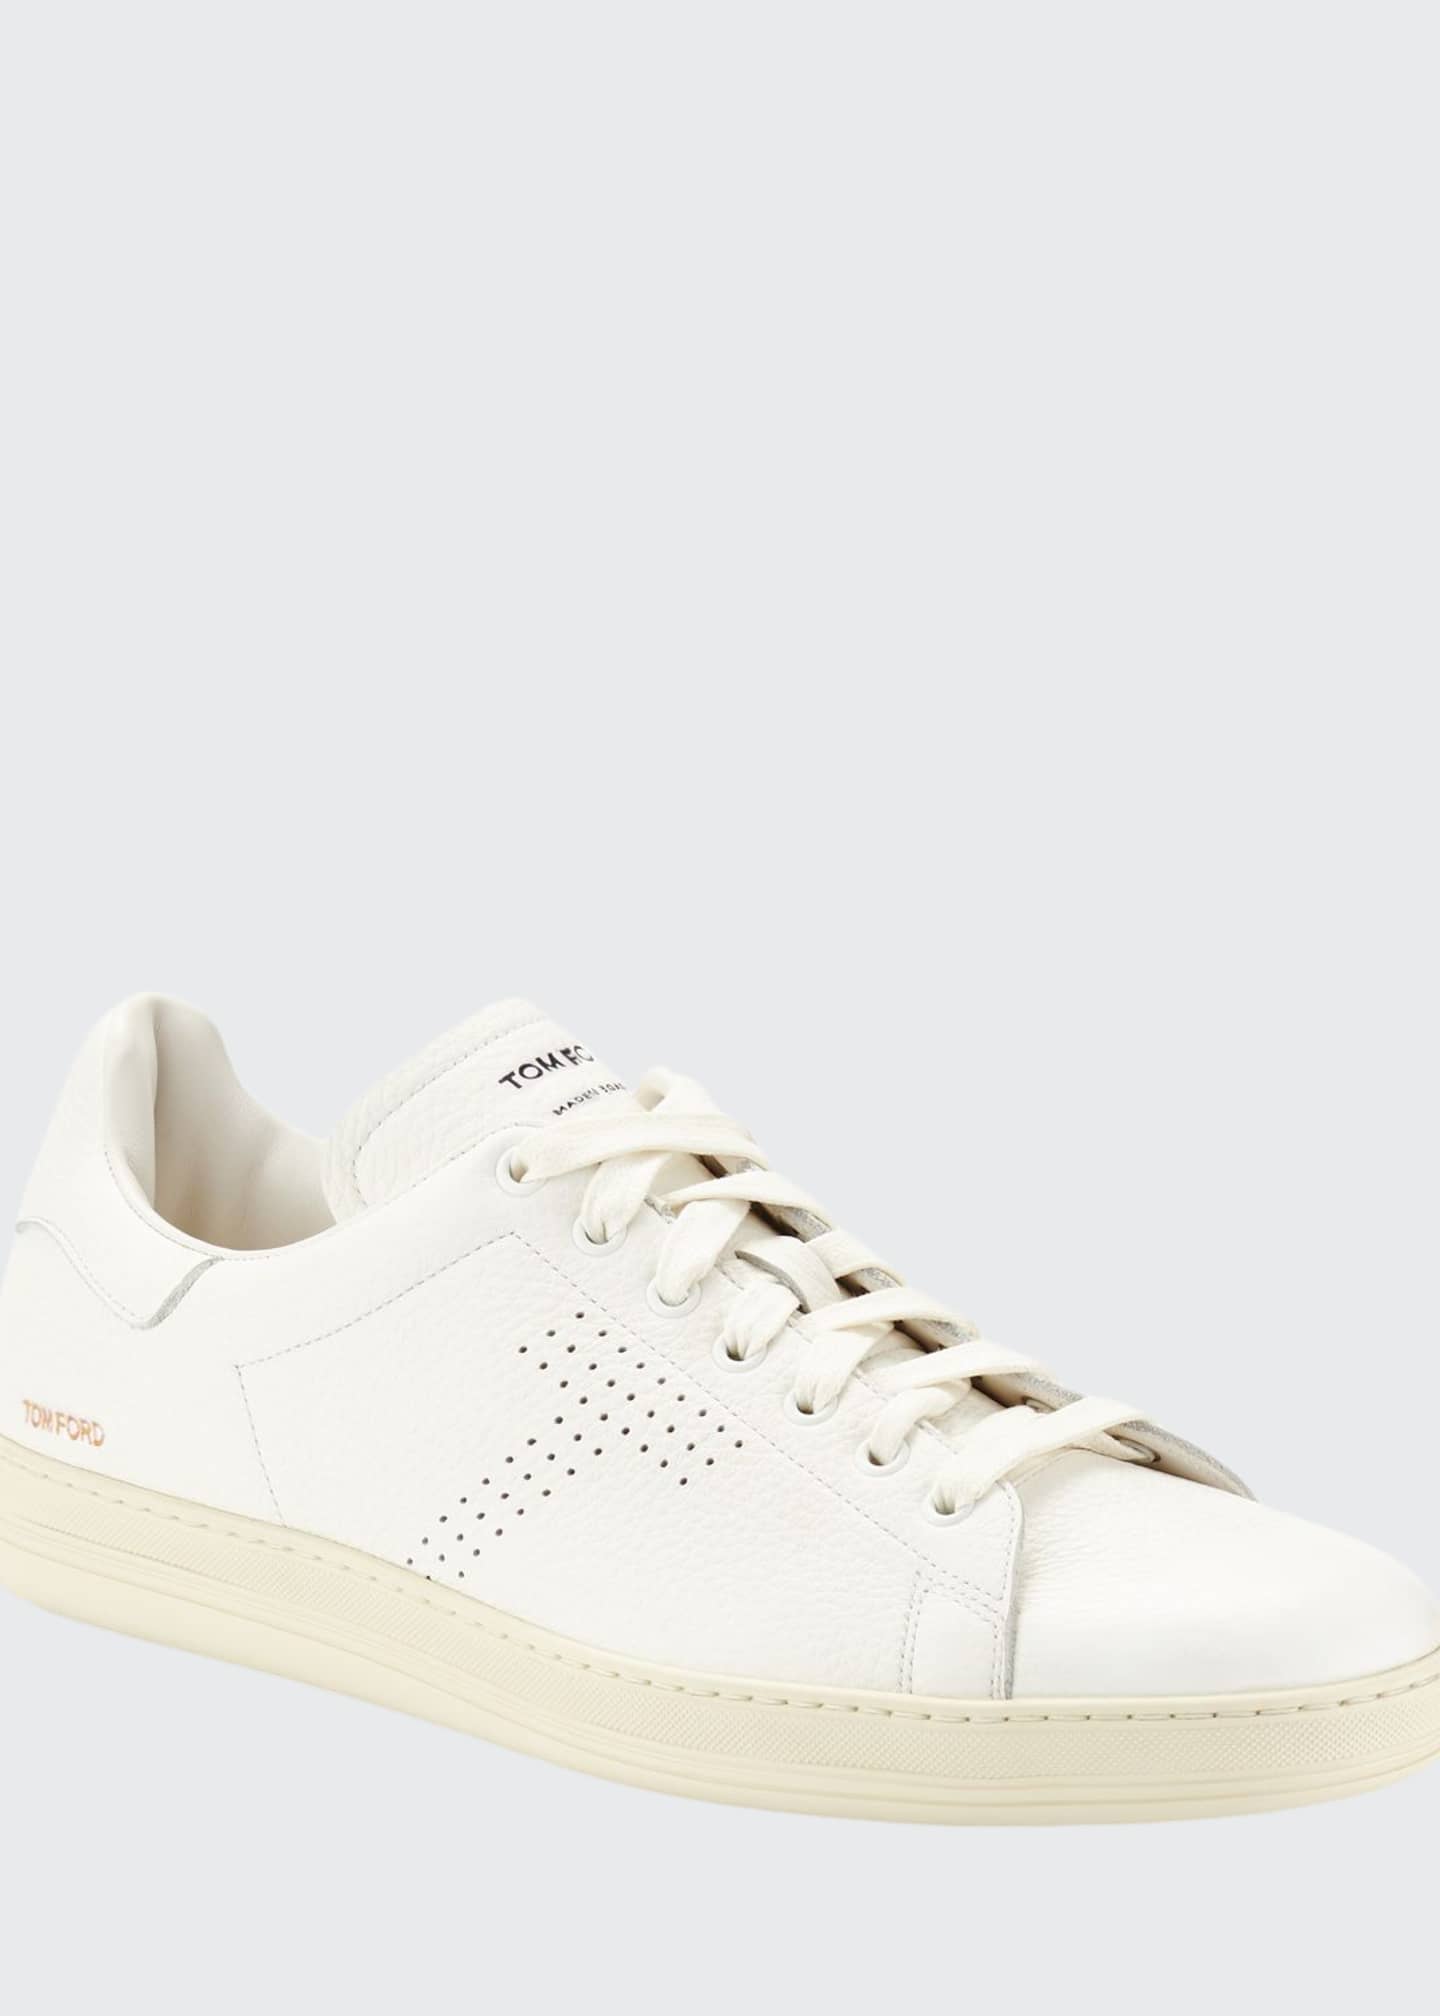 TOM FORD Men's Warwick Grained Leather Low-Top Sneakers, White ...